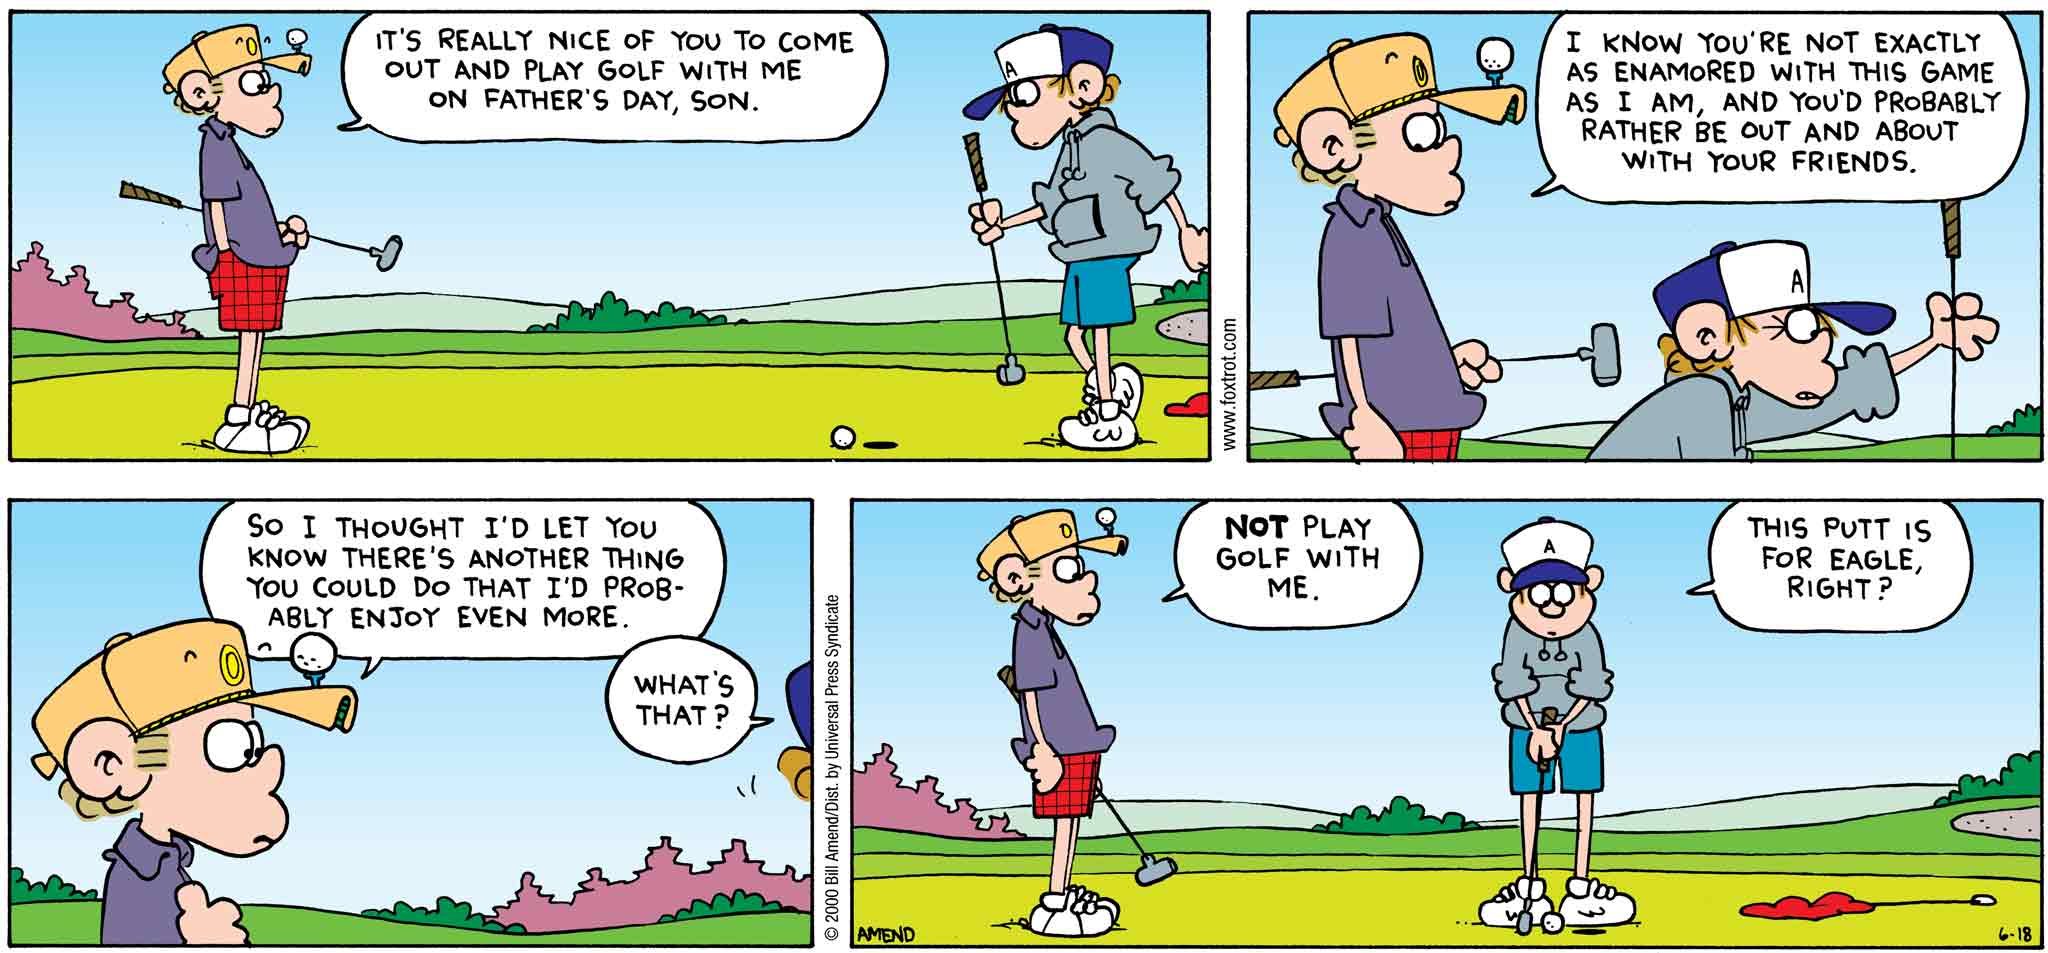 FoxTrot by Bill Amend - Father's Day comic published June 18, 2000 - Roger: It's really nice of you to come out and play golf with me son on Father's Day, son. I know you're not exactly as enamored with this game as I am, and you'd probably rather be out and about with your friends. So I thought I'd let you know there's another things you could do that I'd probably enjoy even more. Peter: What's that? Roger: Not play golf with me. Peter: This putt is for eagle, right?